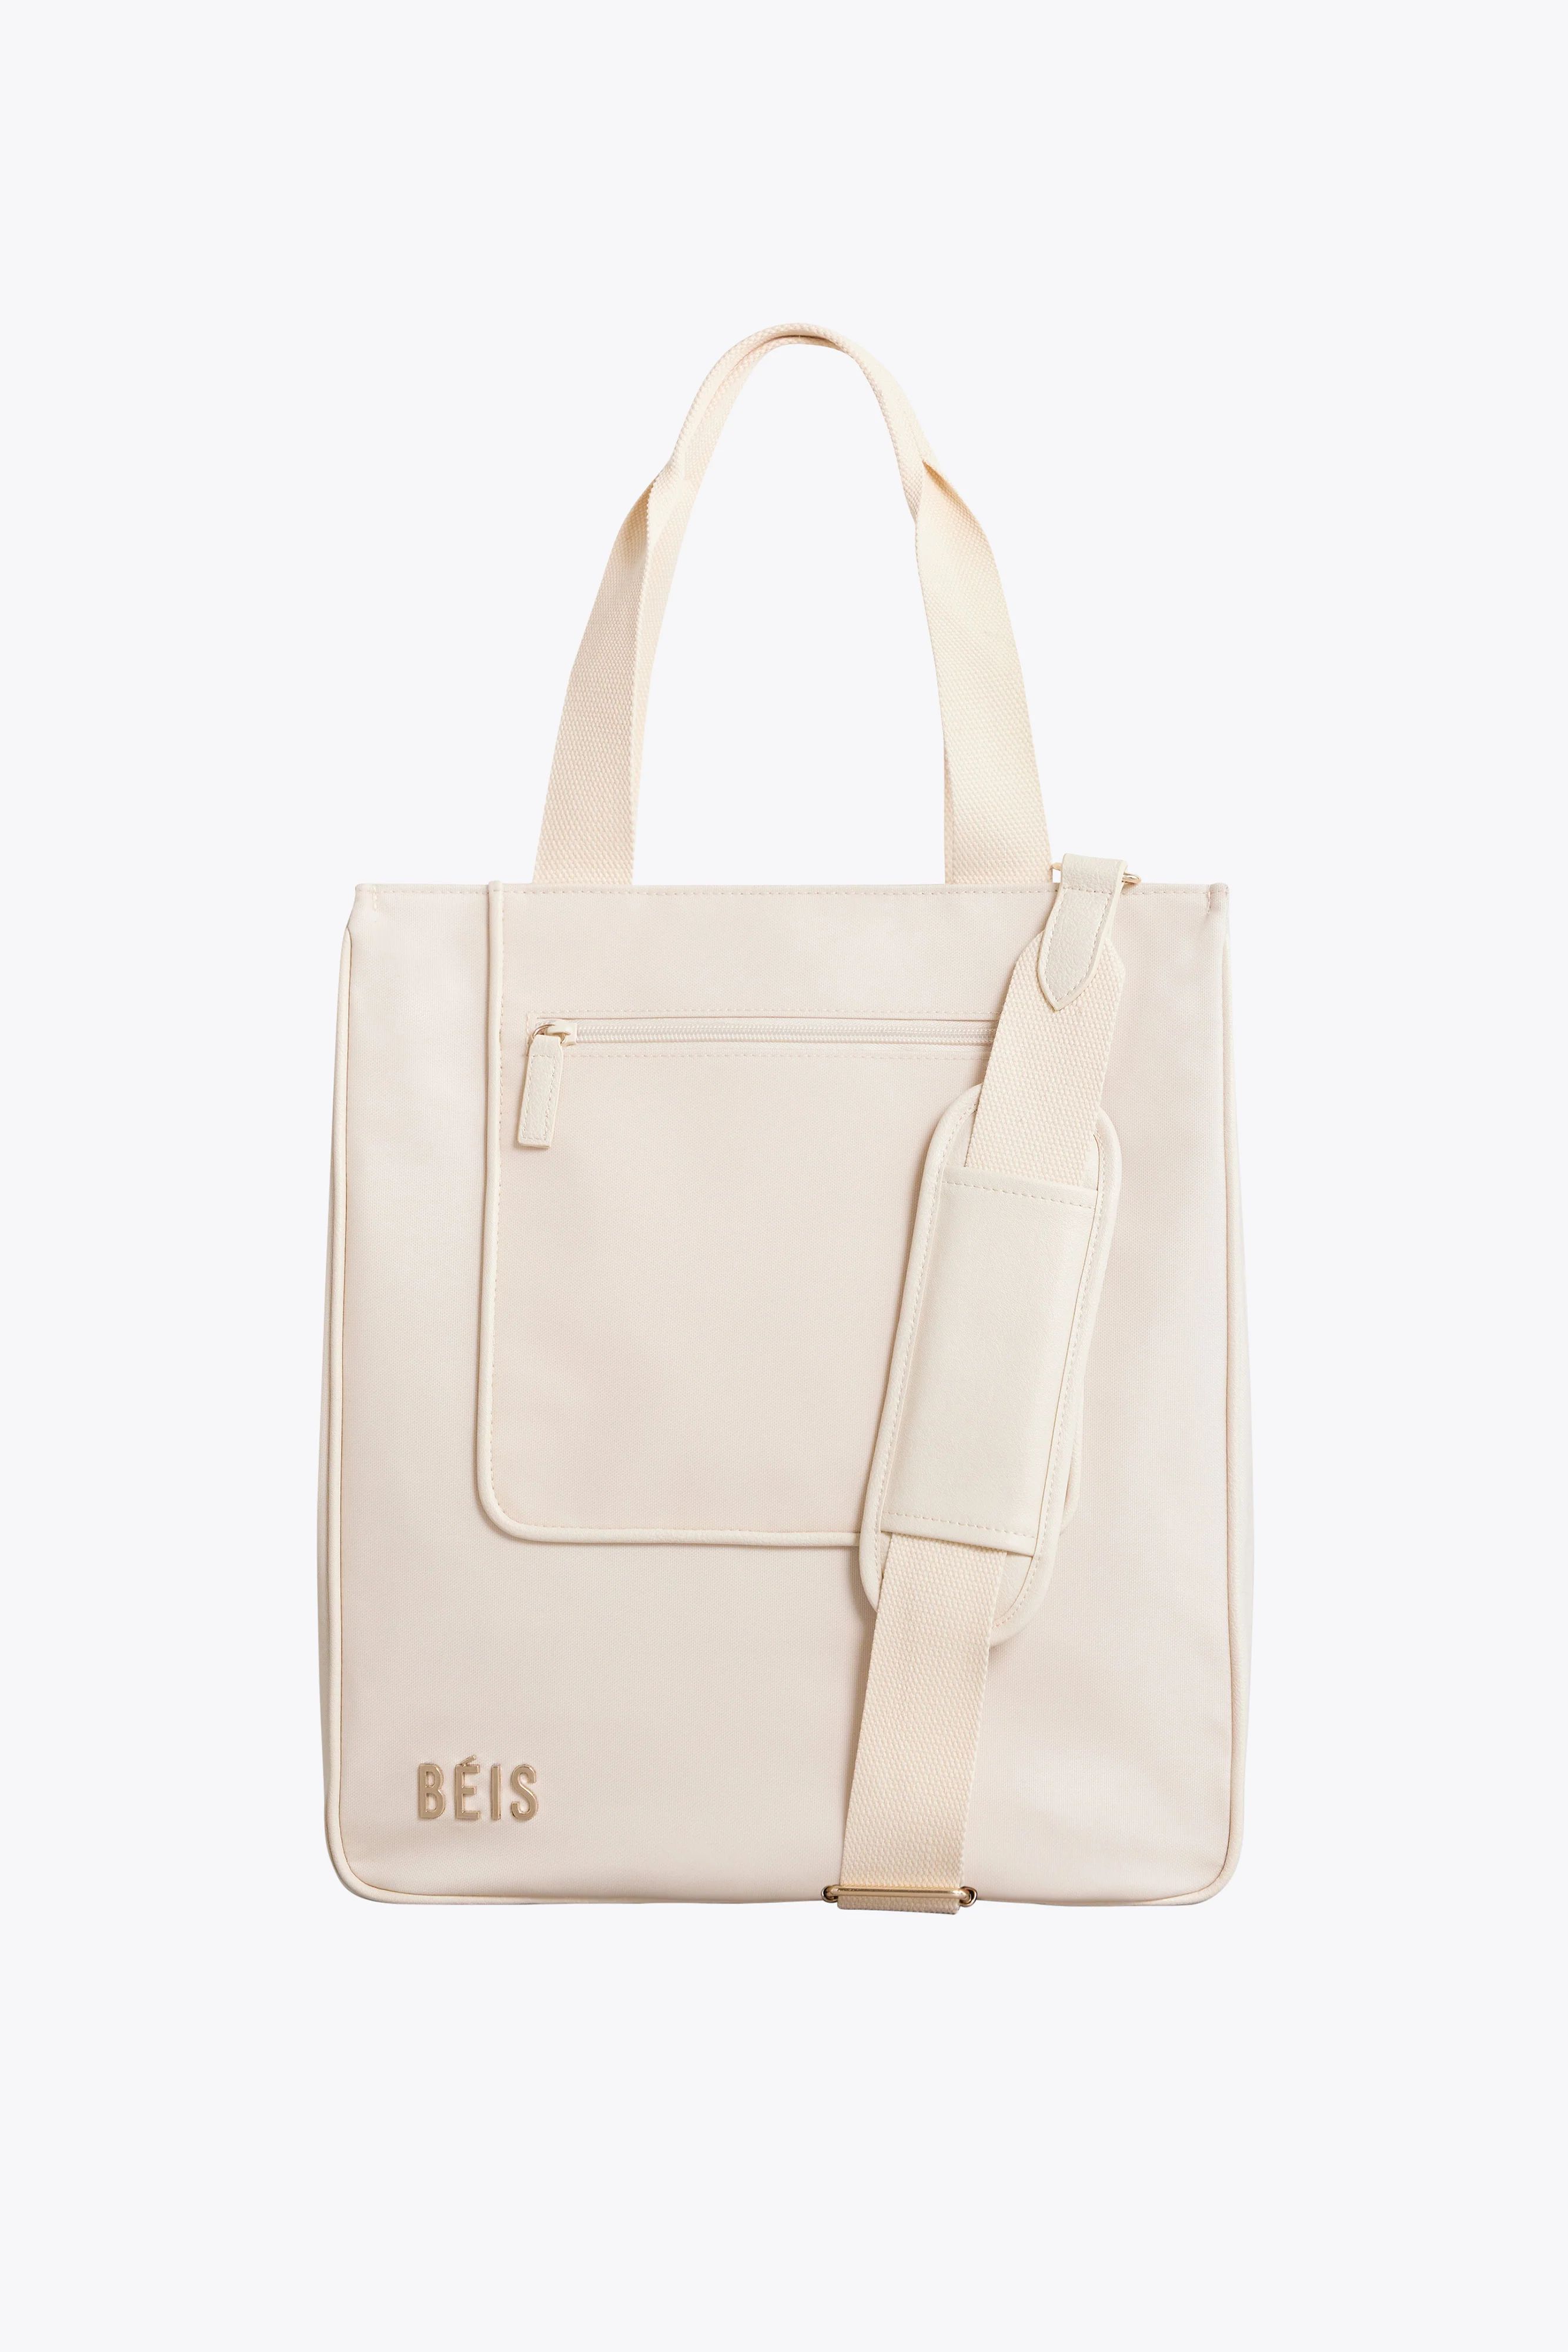 The North To South Tote in Beige | BÉIS Travel